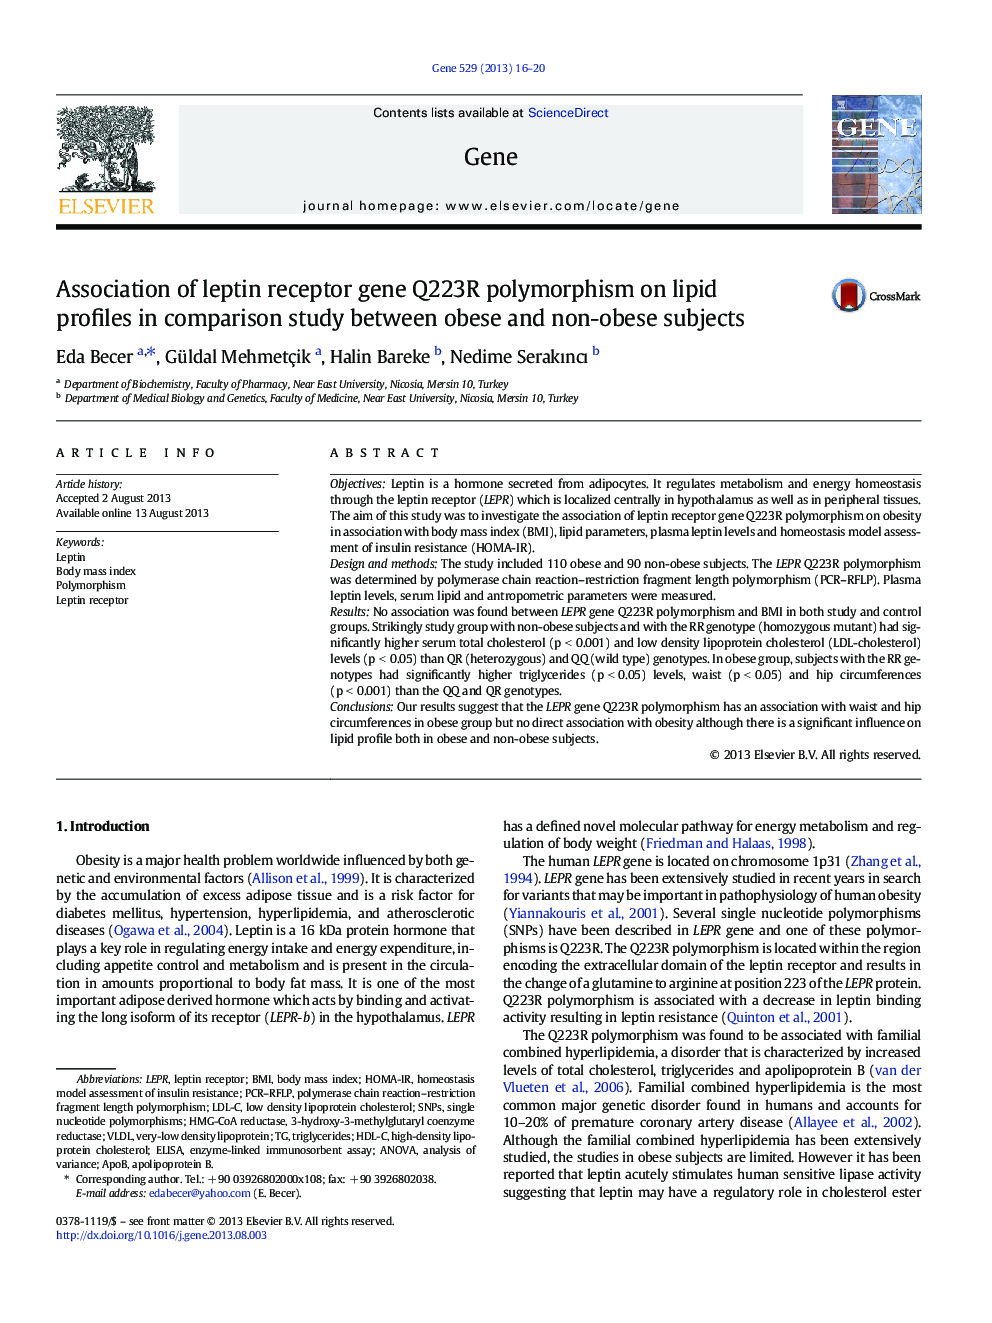 Association of leptin receptor gene Q223R polymorphism on lipid profiles in comparison study between obese and non-obese subjects